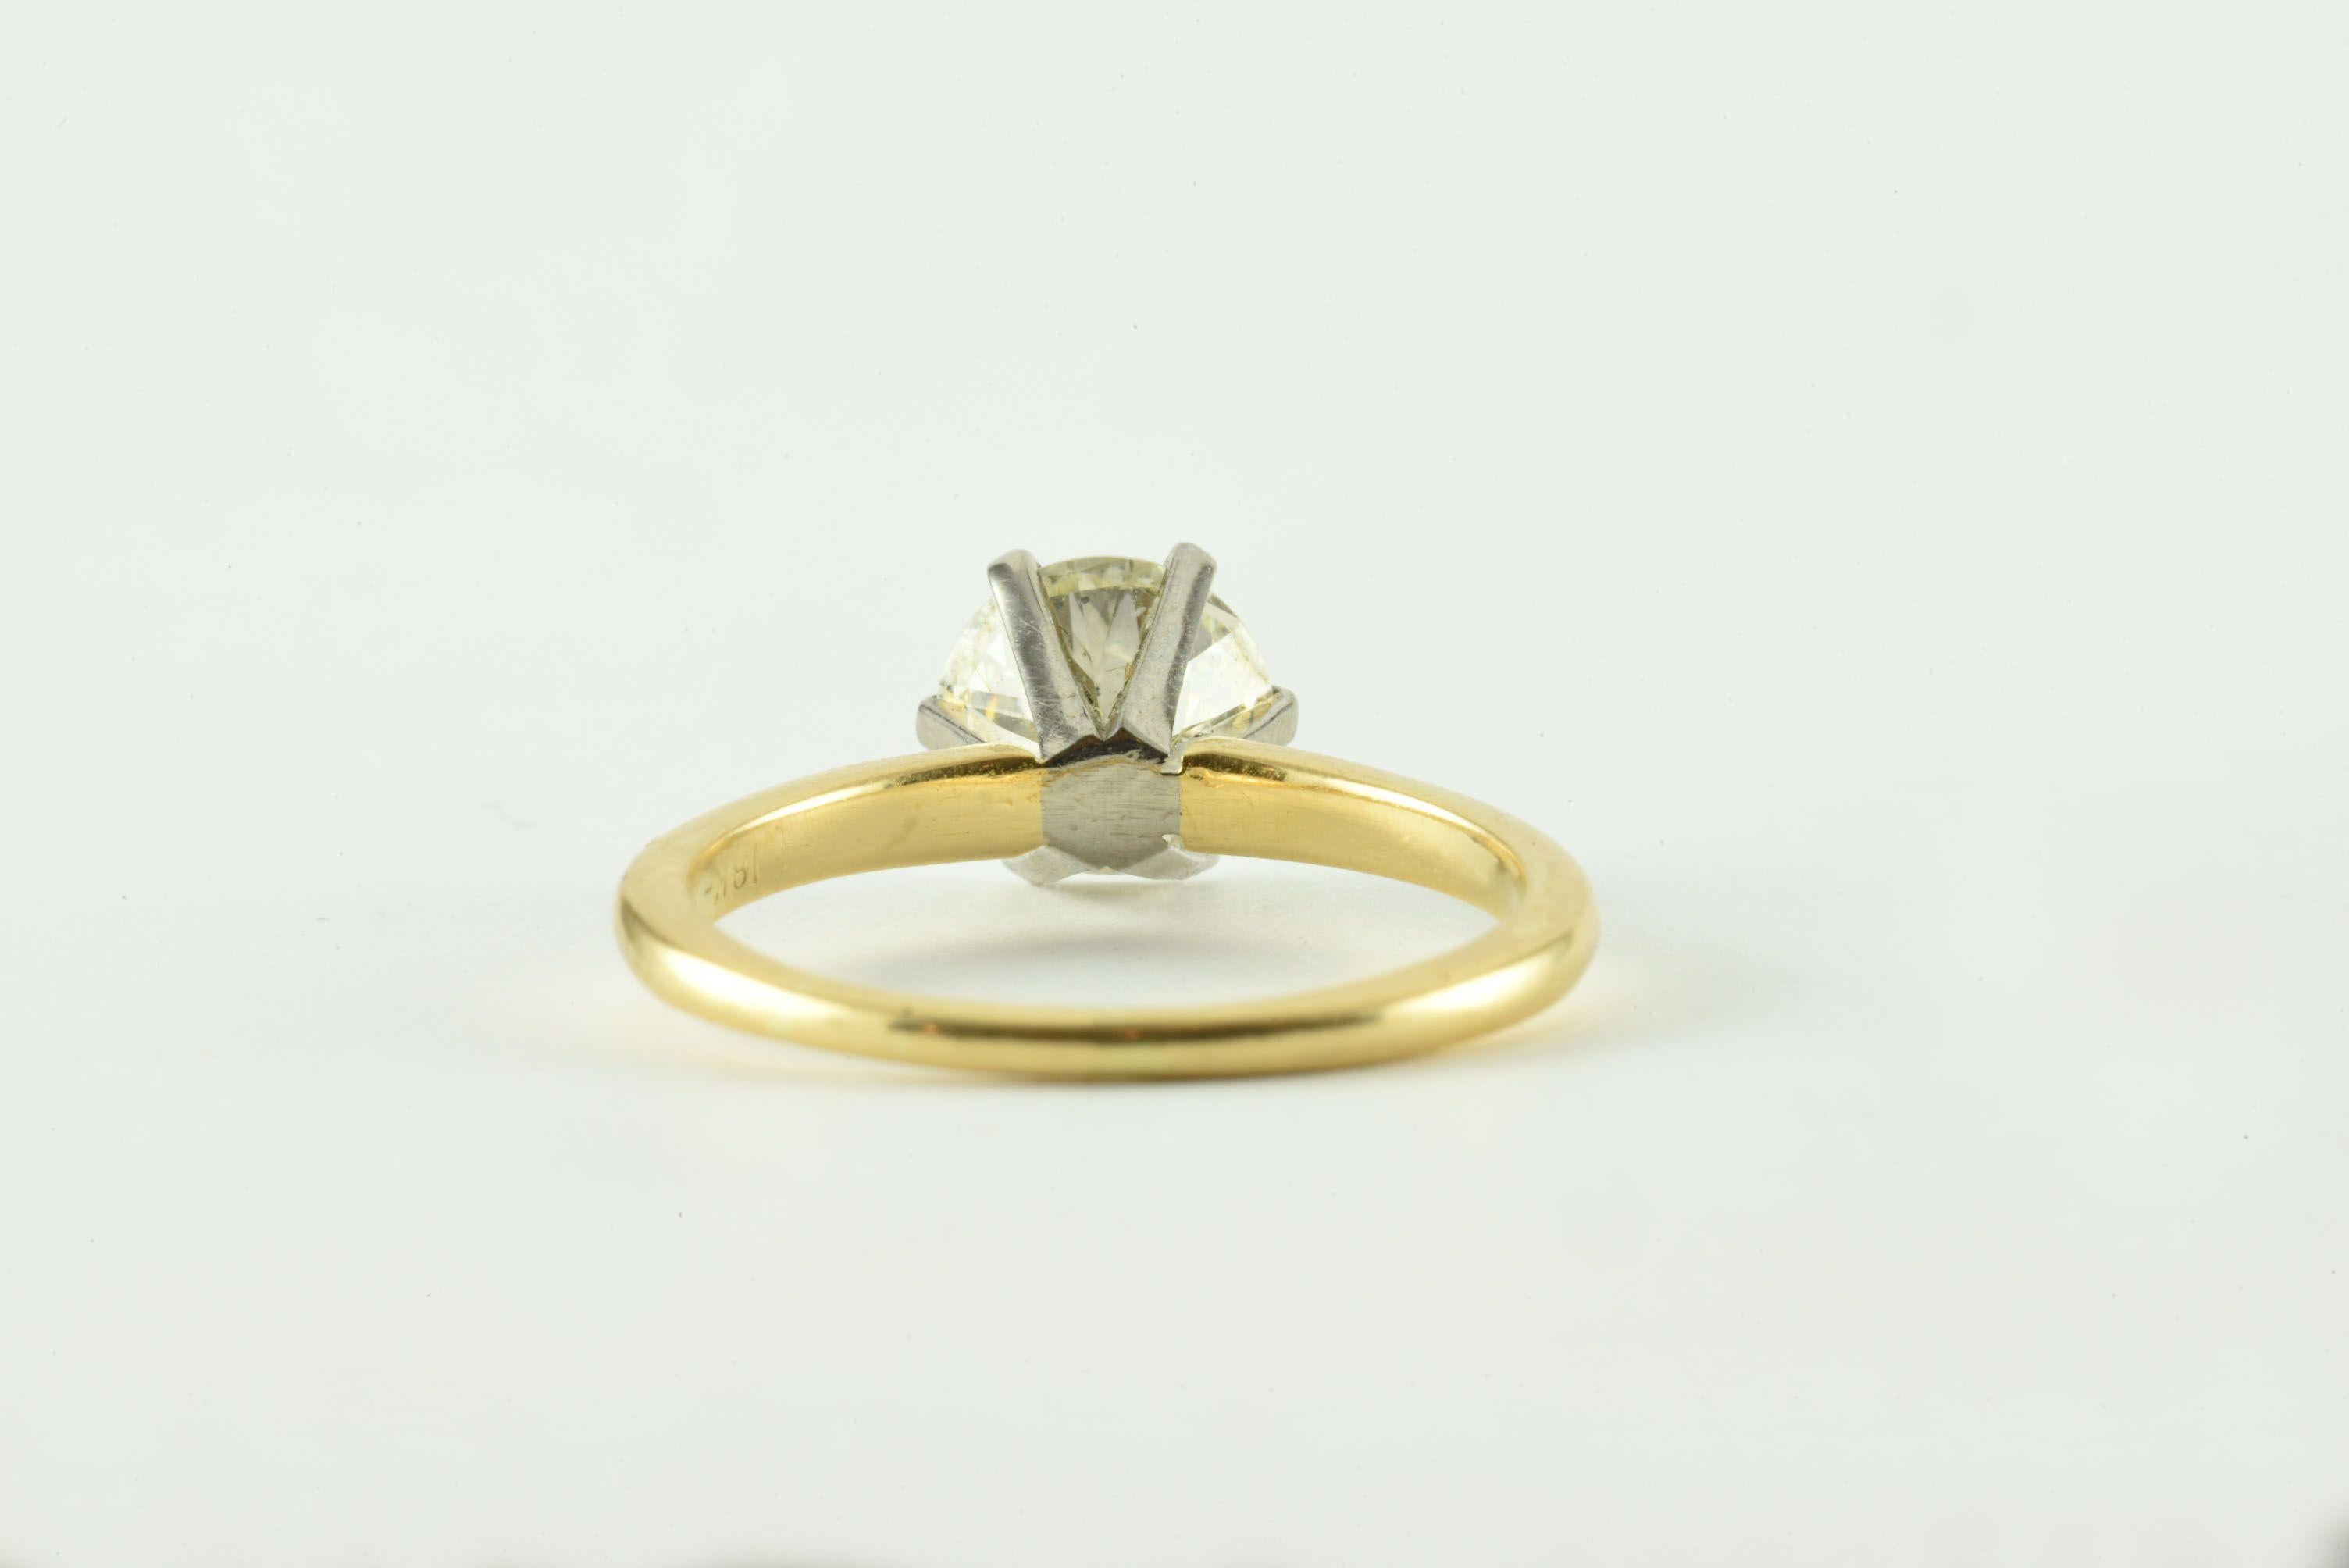 This classic solitaire engagement ring features a stunning Old European cut diamond weighing 1.40 carats, L-M color, SI1 clarity, measuring 7.02 x 7.13 x 4.35mm mounted in a six prong platinum head and a 14kt-18kt yellow gold band. 
